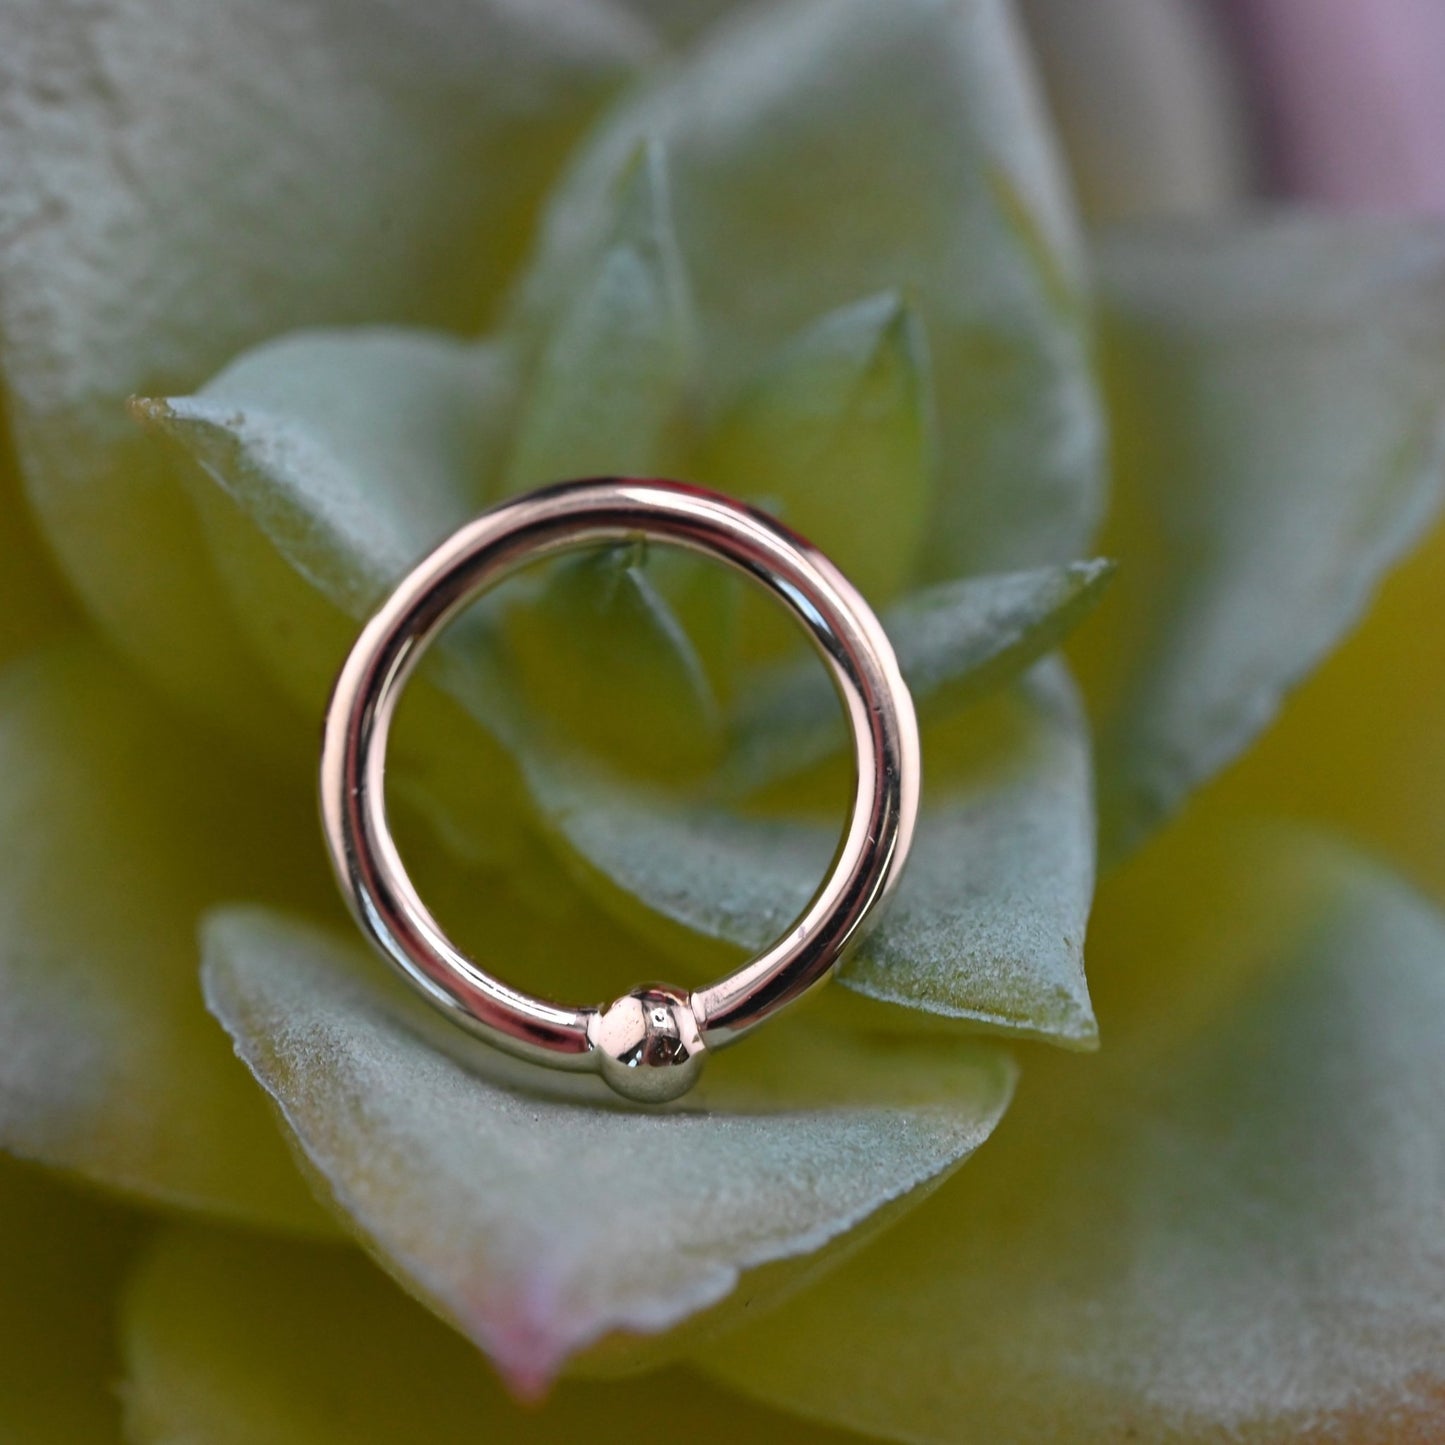 16g Fixed Bead Ring with 2mm Bead - Agave in Bloom